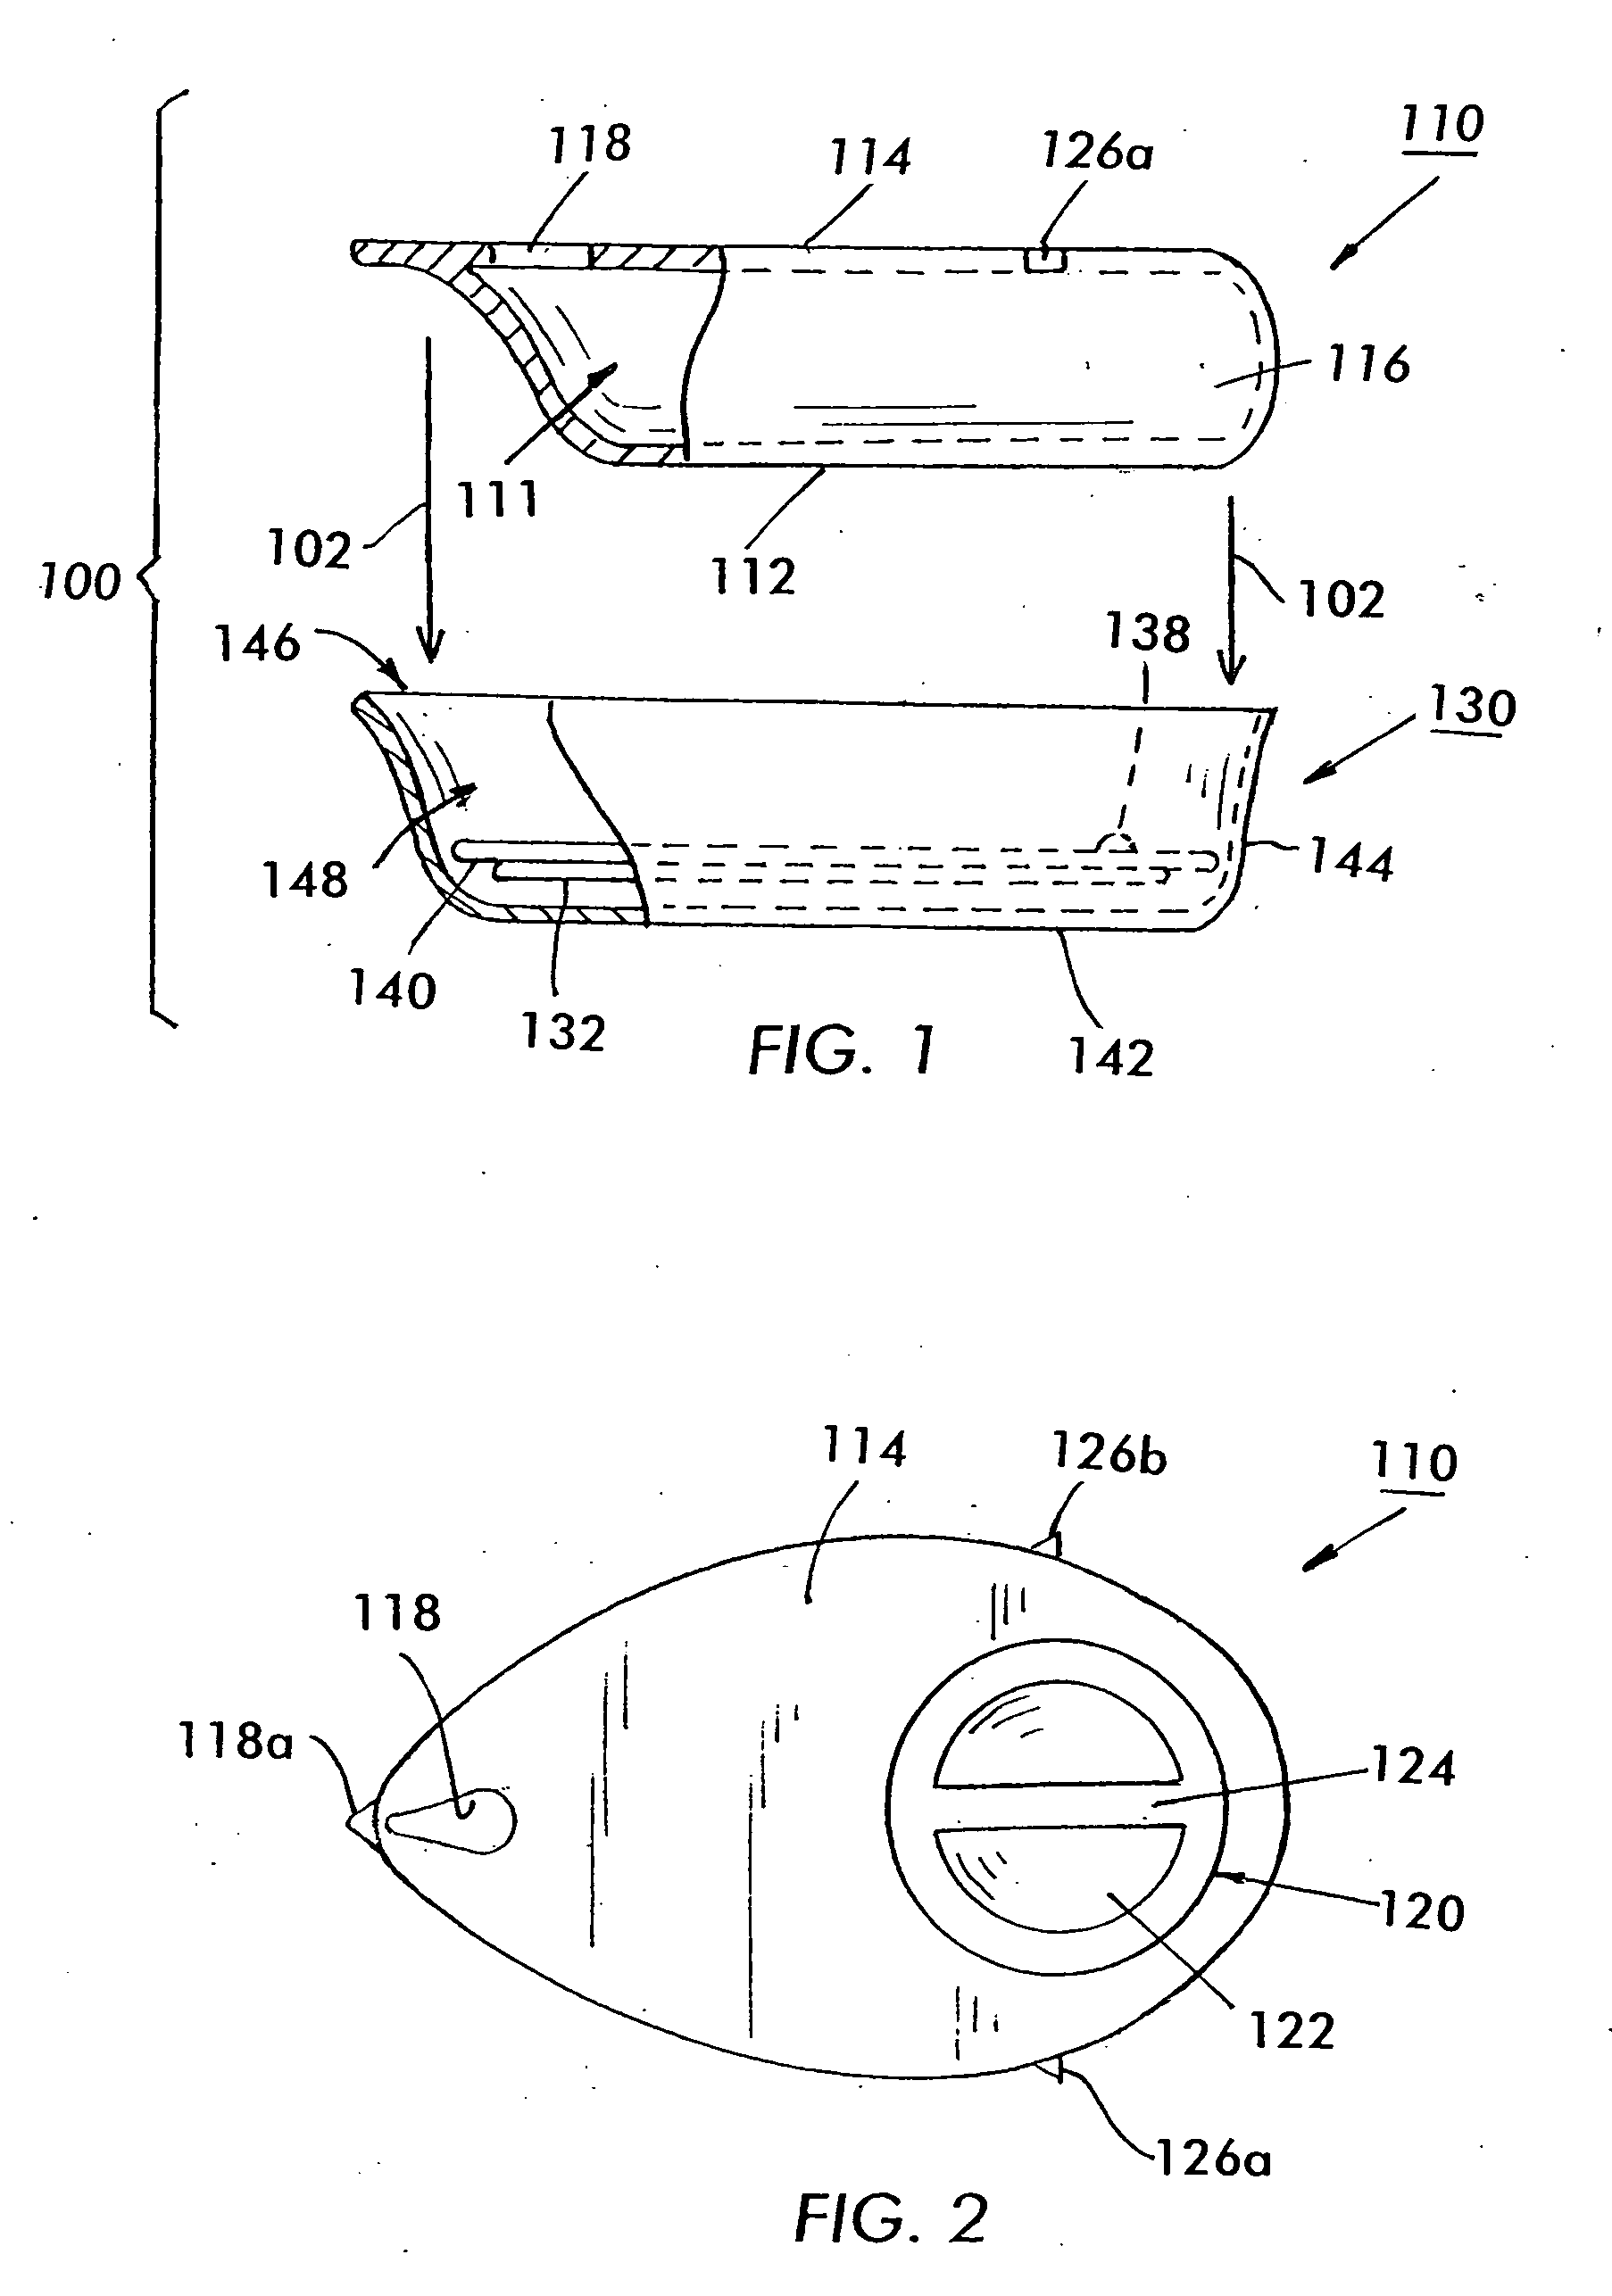 System and method for heating massage oils and the like